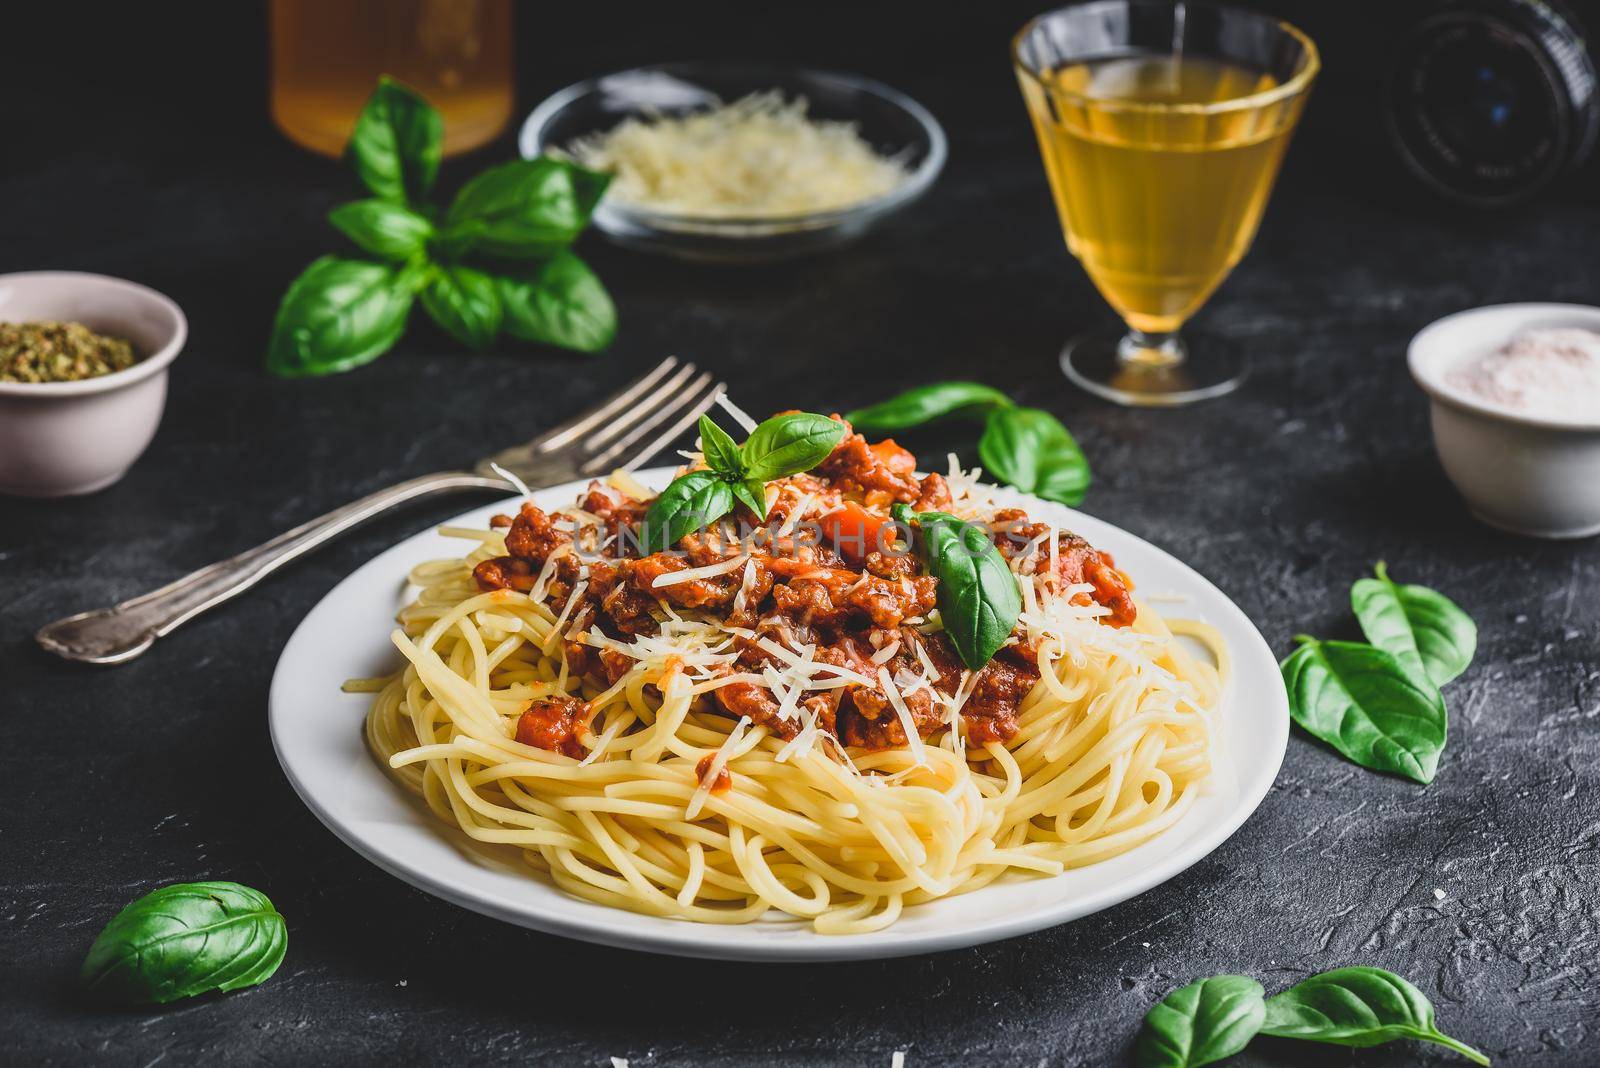 Spaghetti with bolognese sauce and parmesan cheese by Seva_blsv